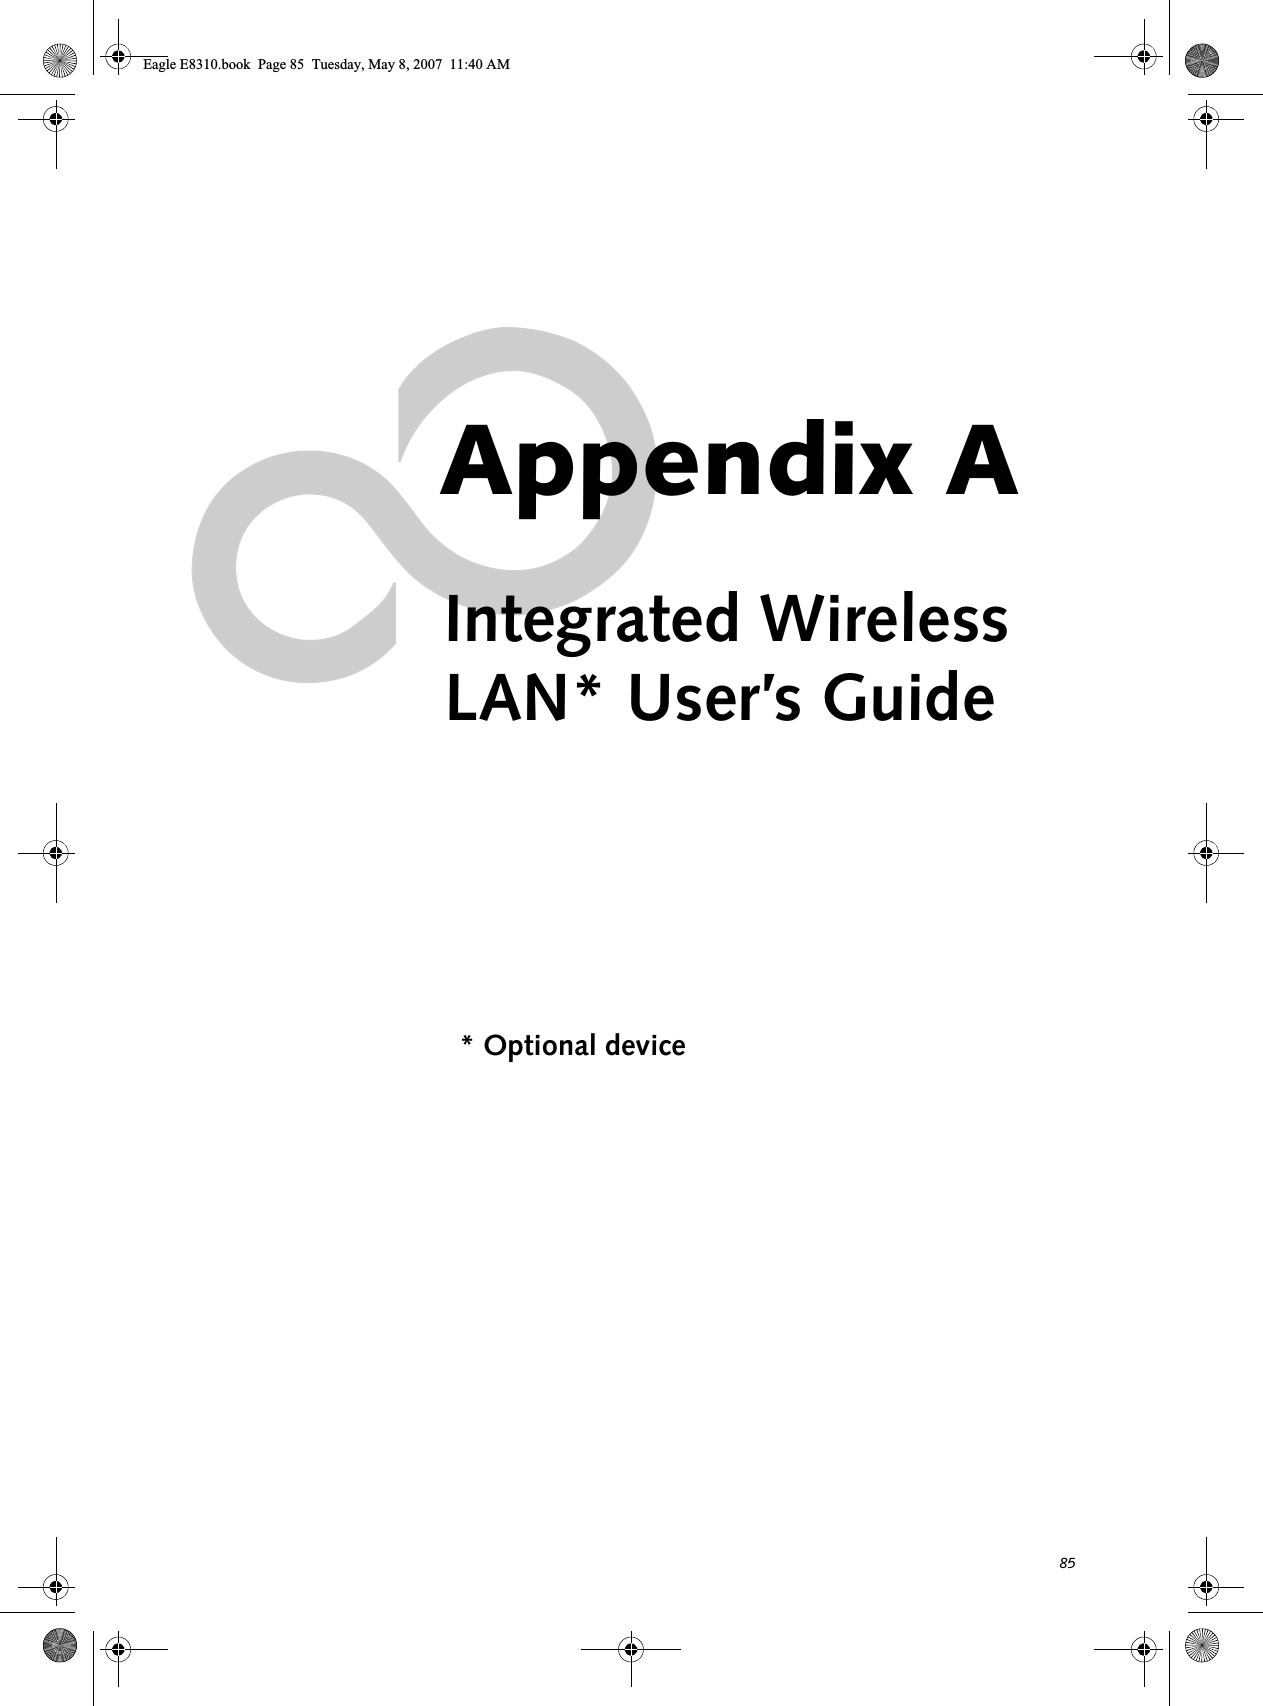 85Appendix AIntegrated WirelessLAN* User’s Guide* Optional deviceEagle E8310.book  Page 85  Tuesday, May 8, 2007  11:40 AM